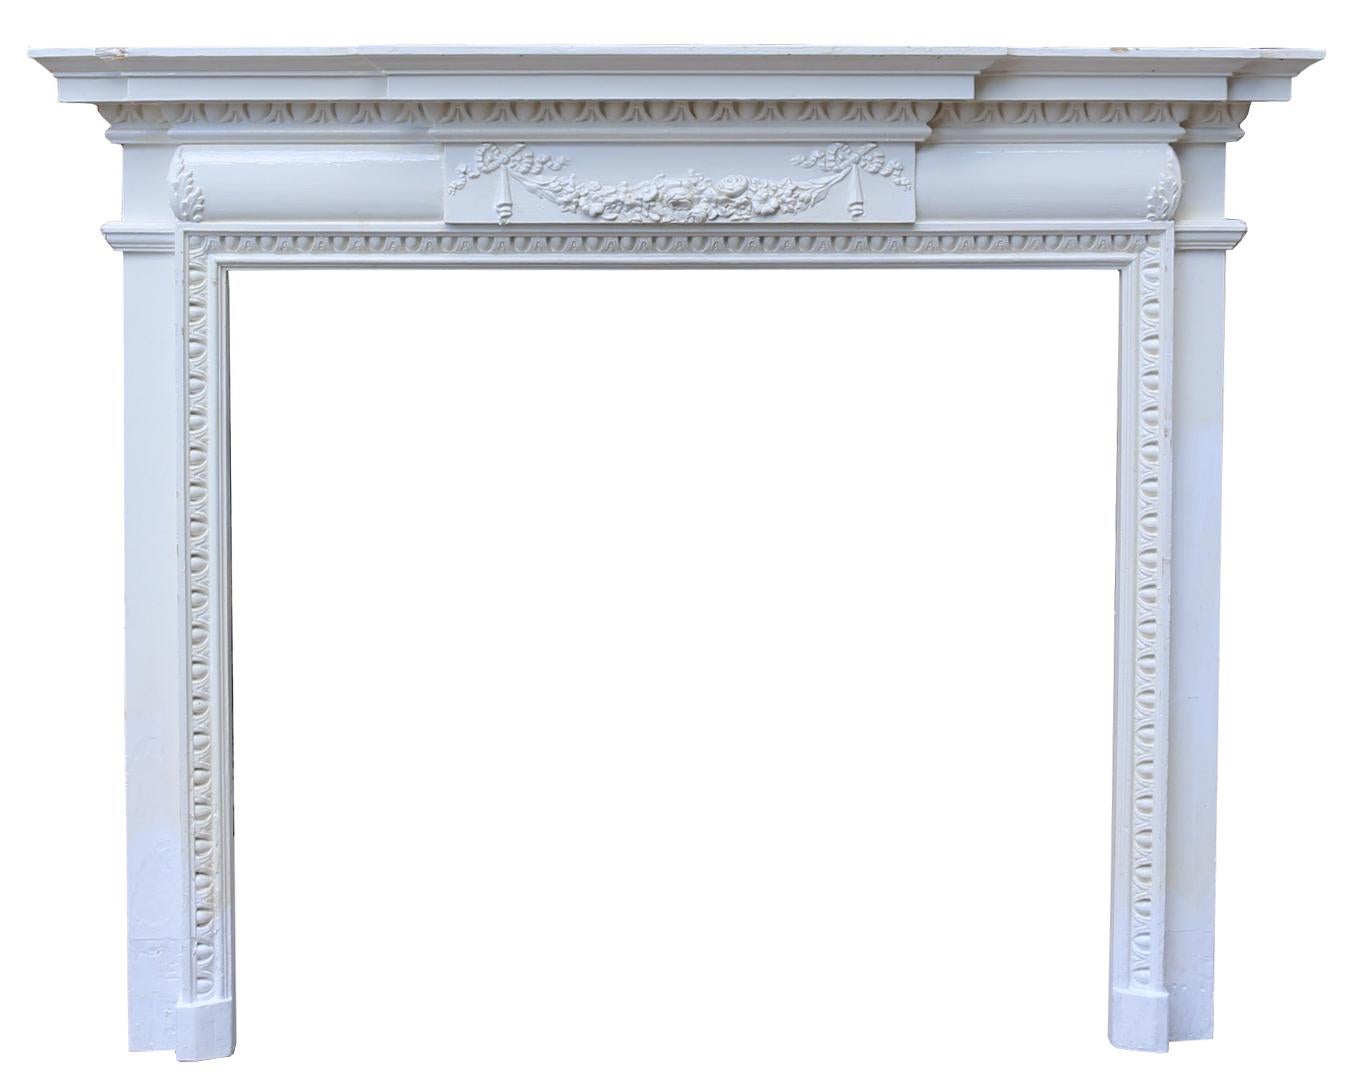 This fire surround was salvaged from a house in South East London.
Additional dimensions:

Opening height 104 cm

Opening width 117.5 cm.